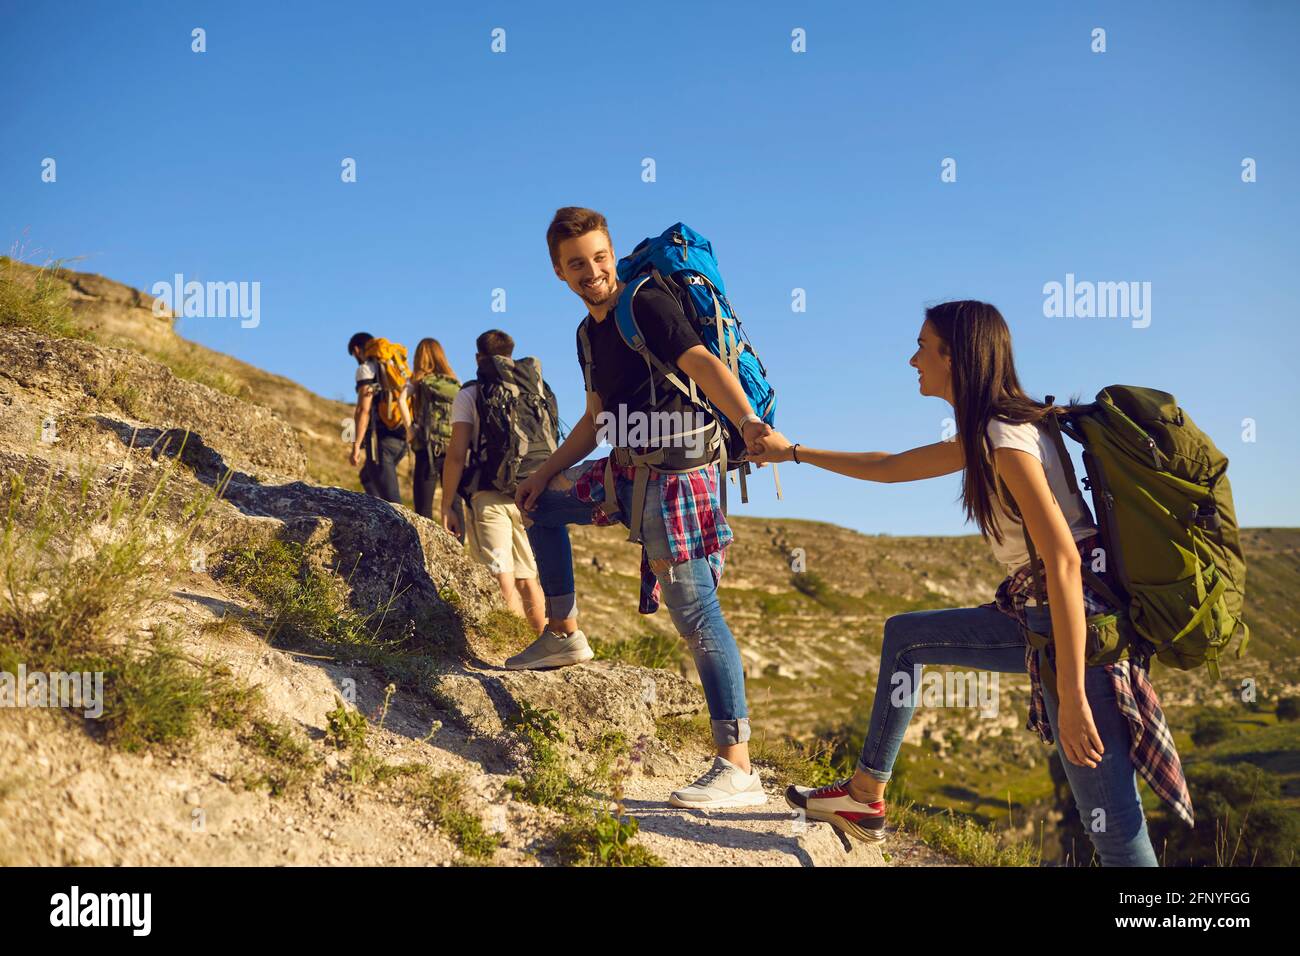 Group of tourists on hiking trip in mountains. Team of active young people with backpacks mountaineering outdoors Stock Photo